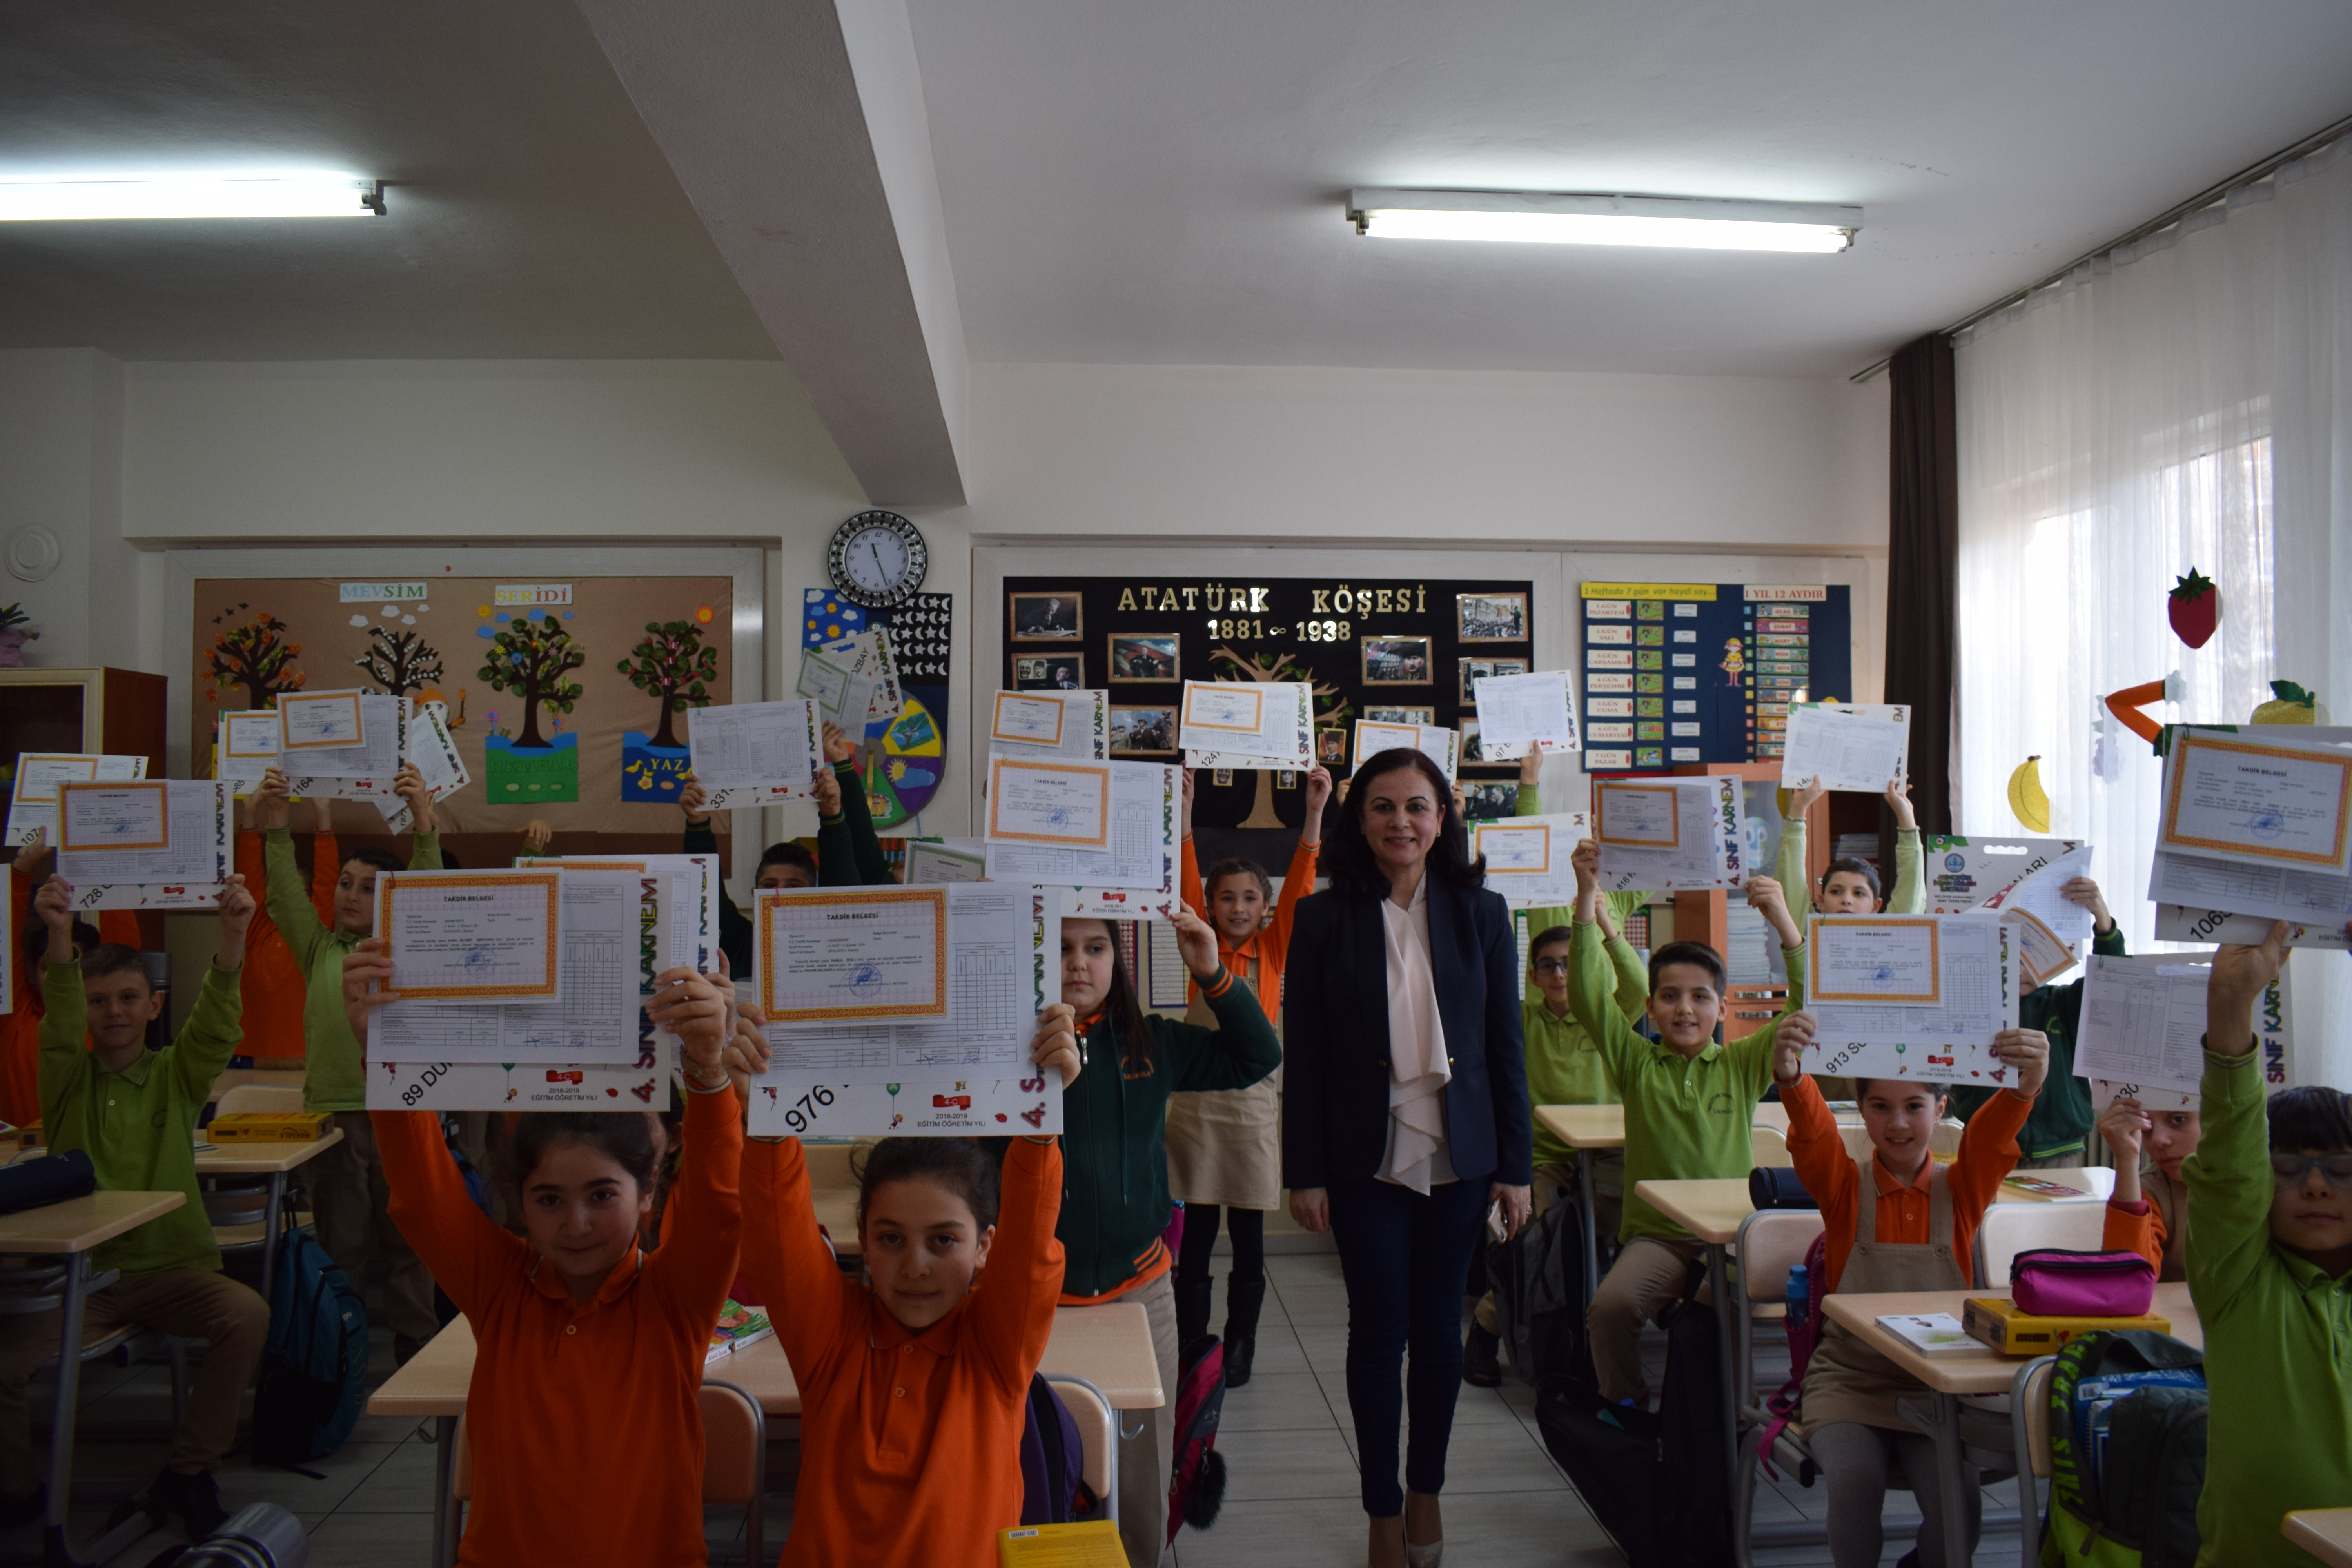 18 million Turkish students receive midterm report cards